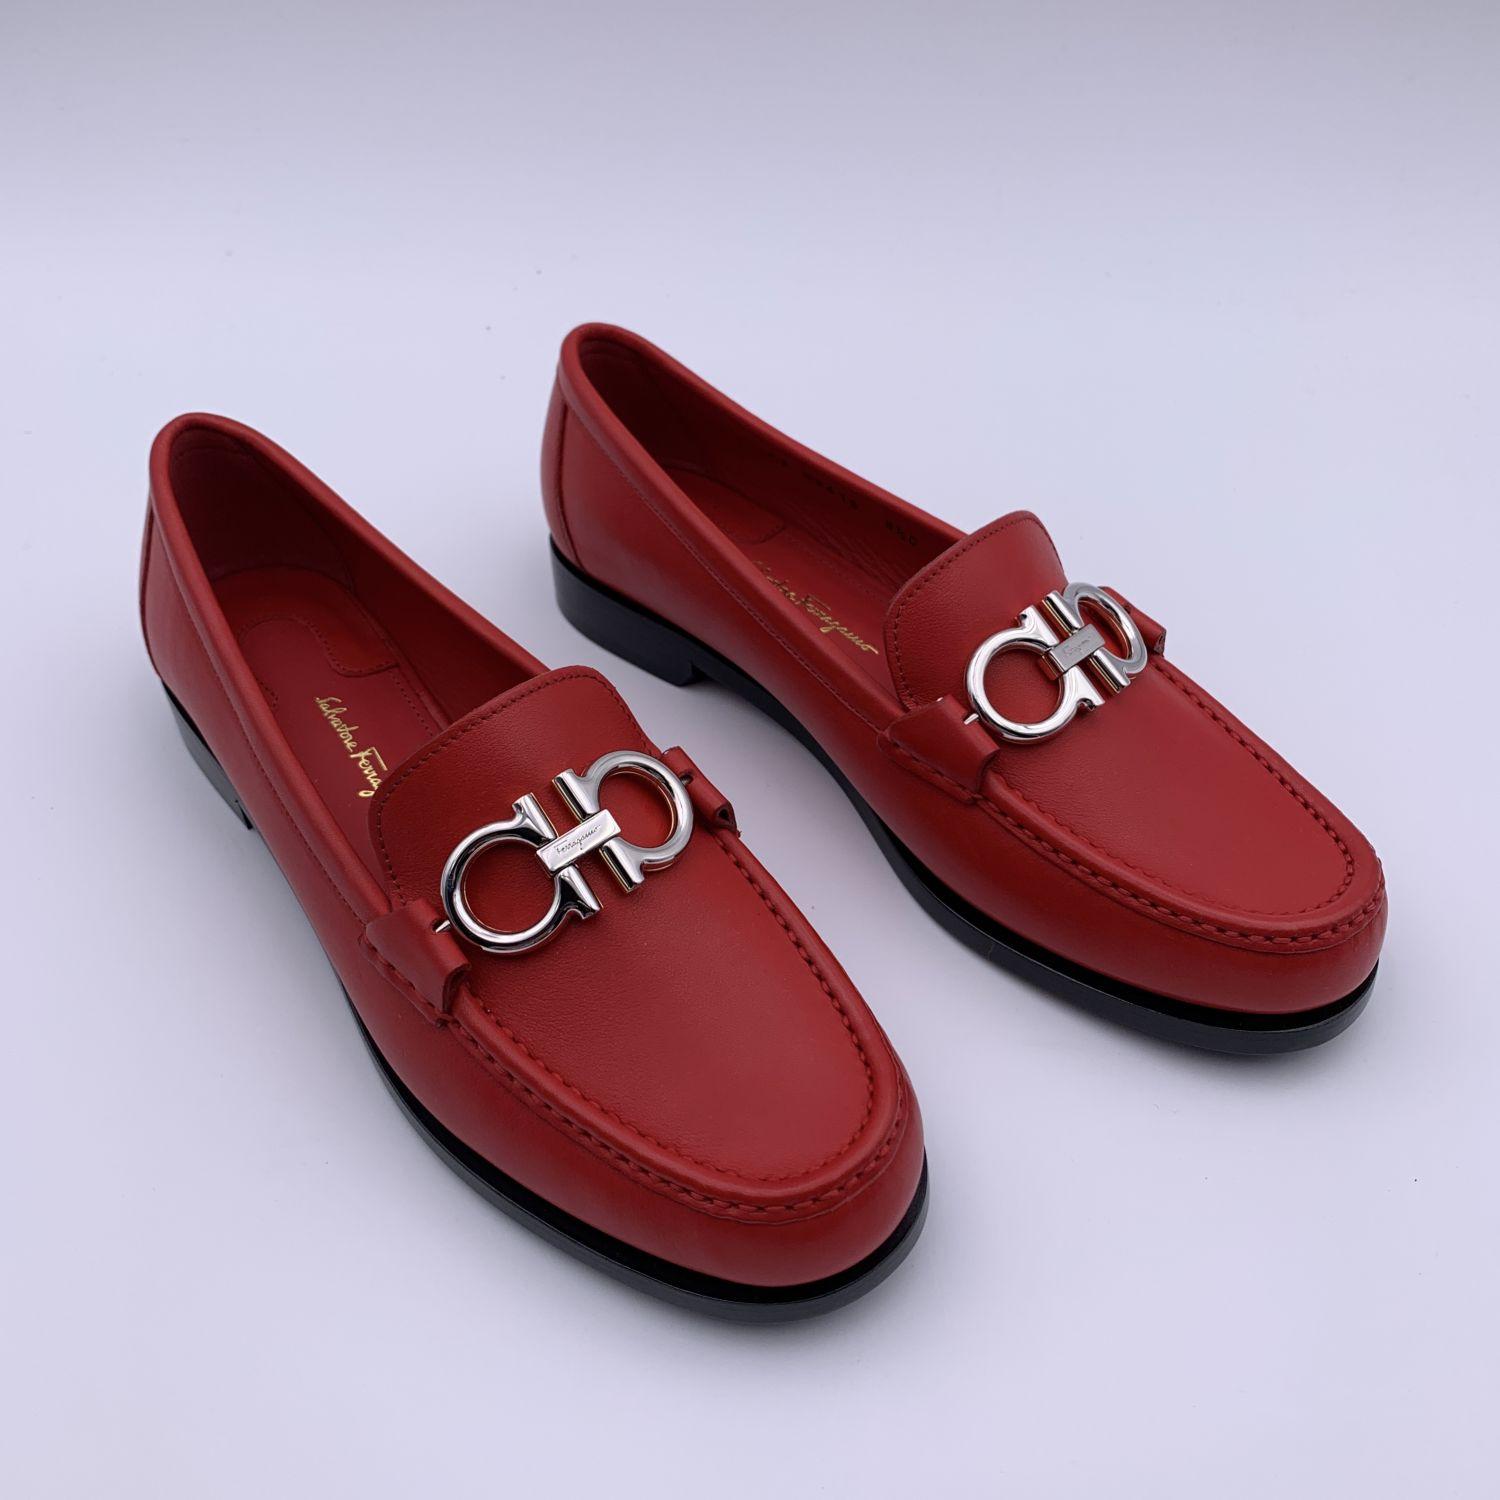 size 5.5 loafers